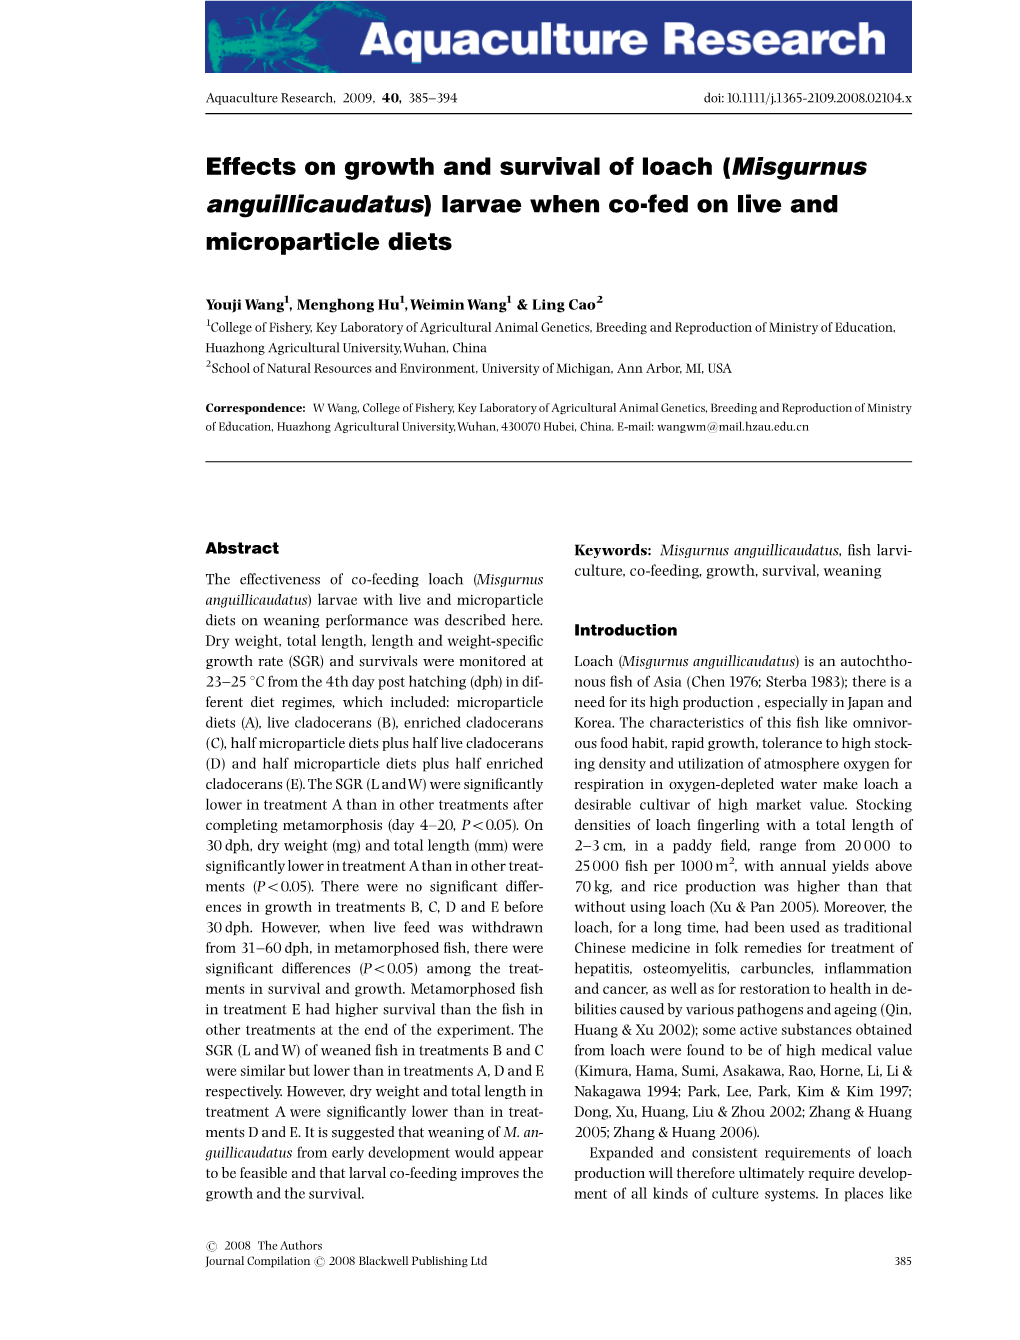 Effects on Growth and Survival of Loach (Misgurnus Anguillicaudatus) Larvae When Co-Fed on Live and Microparticle Diets